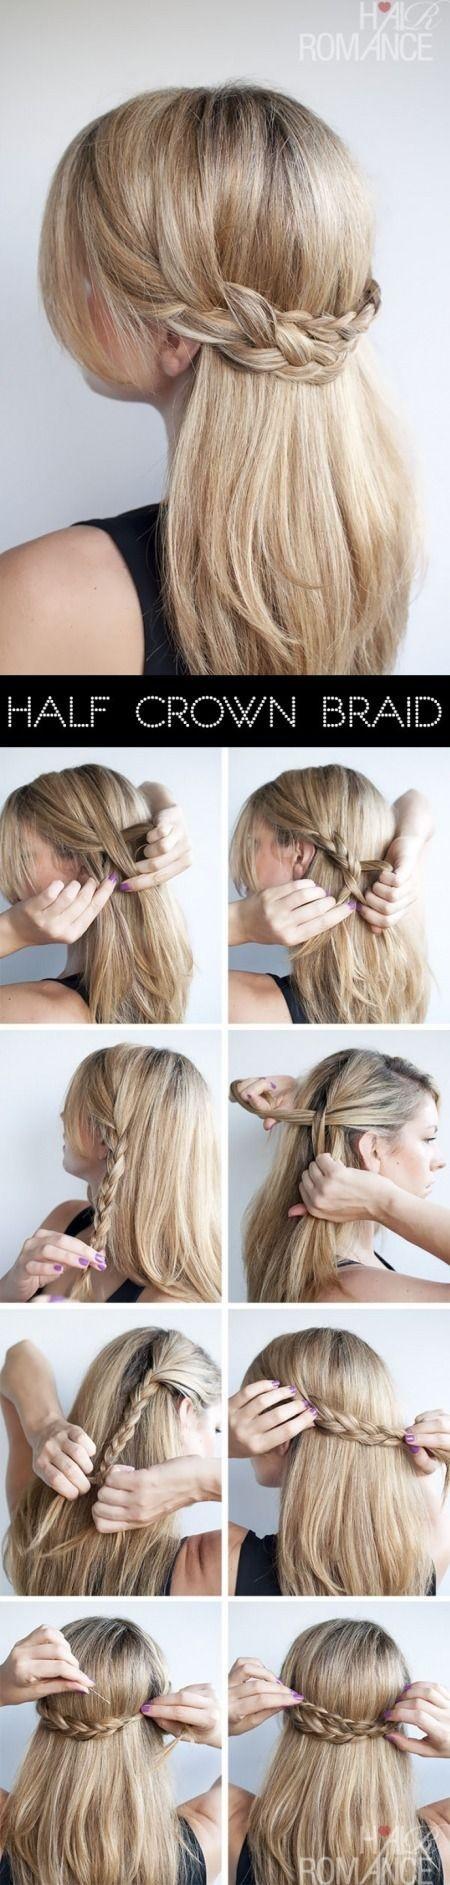 Some simple cute hairstyle ideas some-simple-cute-hairstyle-ideas-92_18